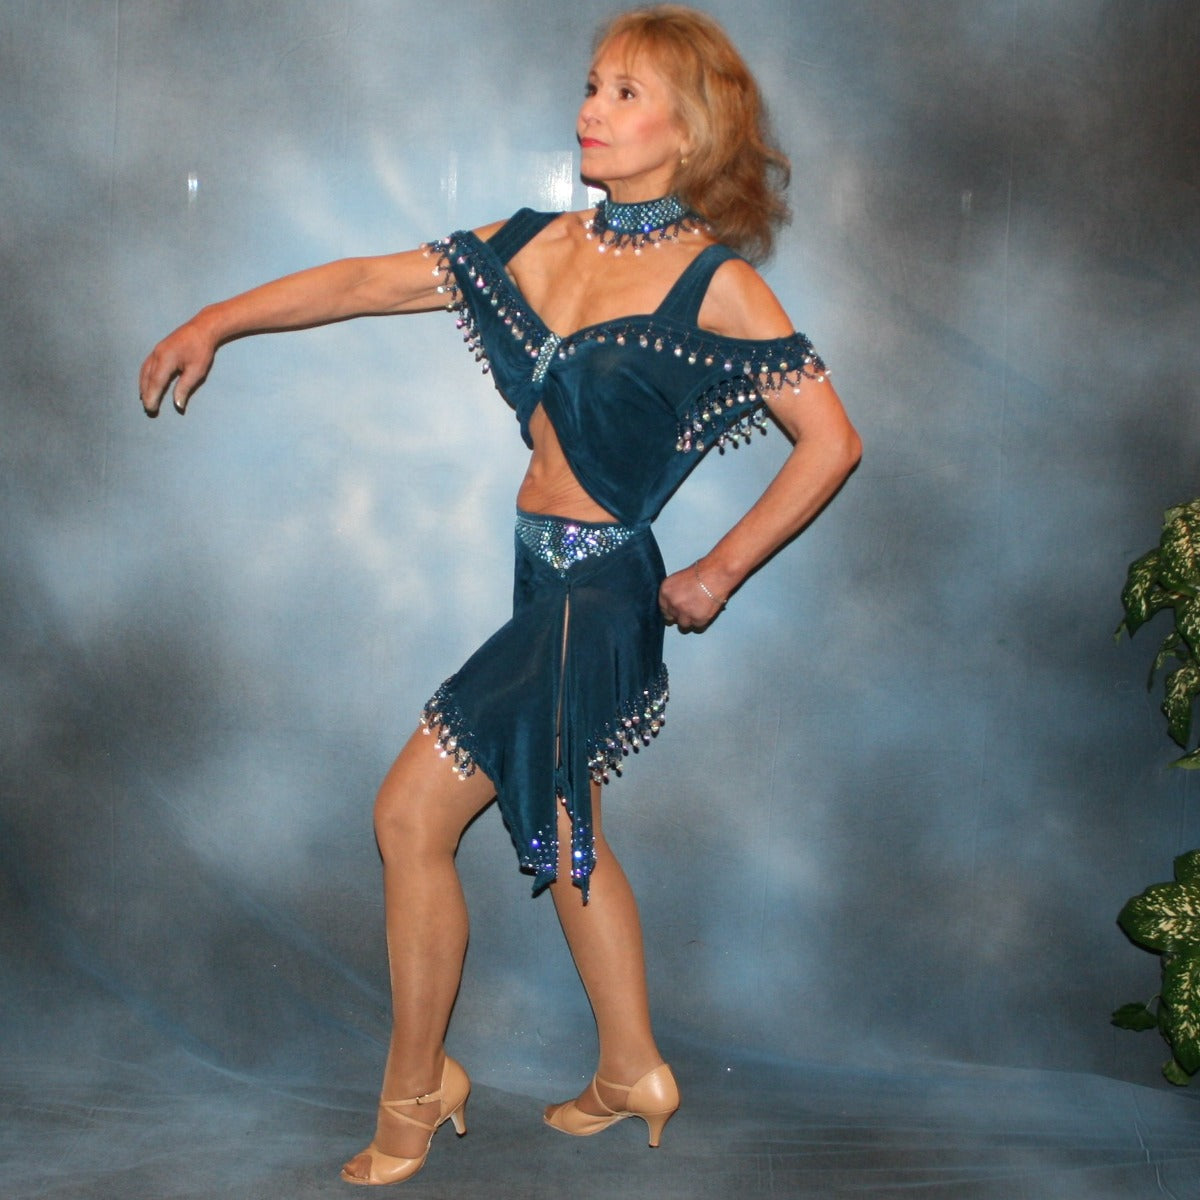 Crystal's Creations side view of 2 piece blue Latin/rhythm dance dress was created of deep sea blue luxurious solid slinky with cascades of hand beaded fringe plus light sapphire Swarovski rhinestone work. The Latin dance skirt has built in tights.